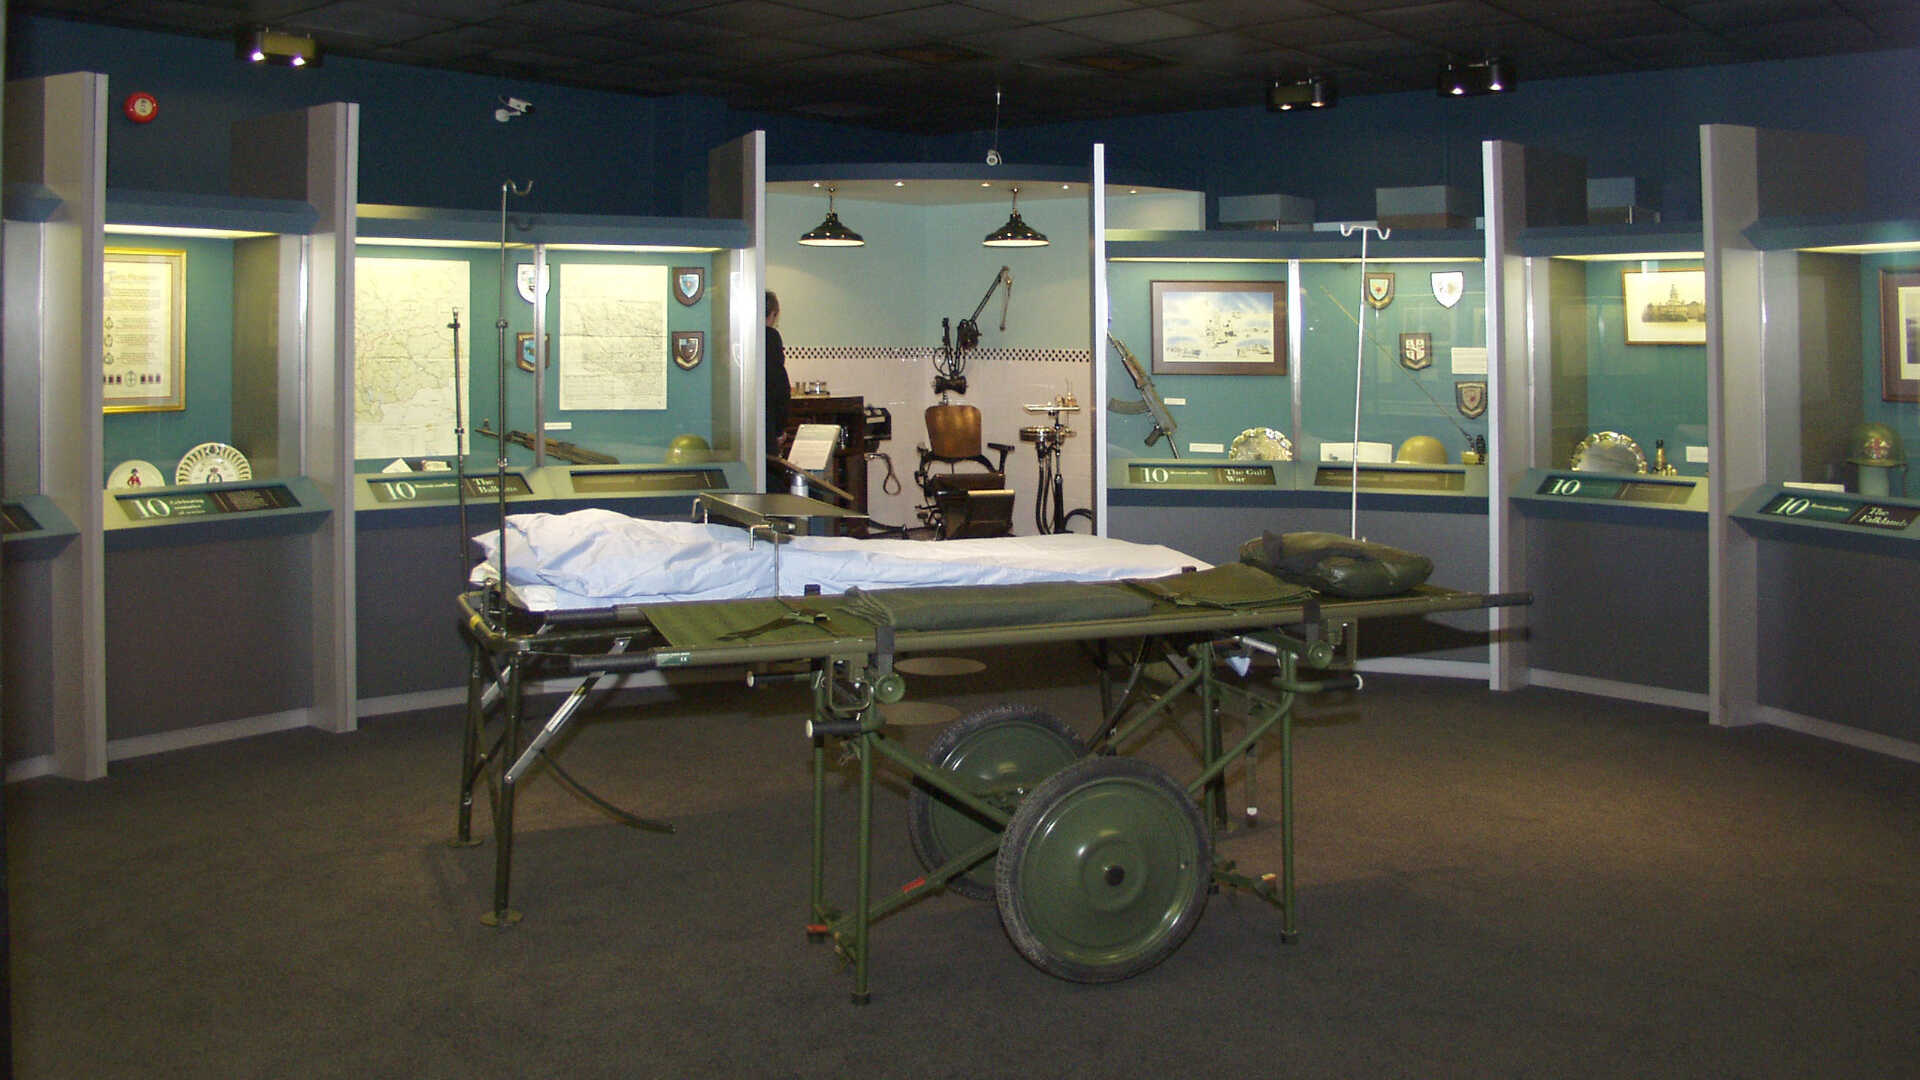 military hospital bed displayed next to display cases